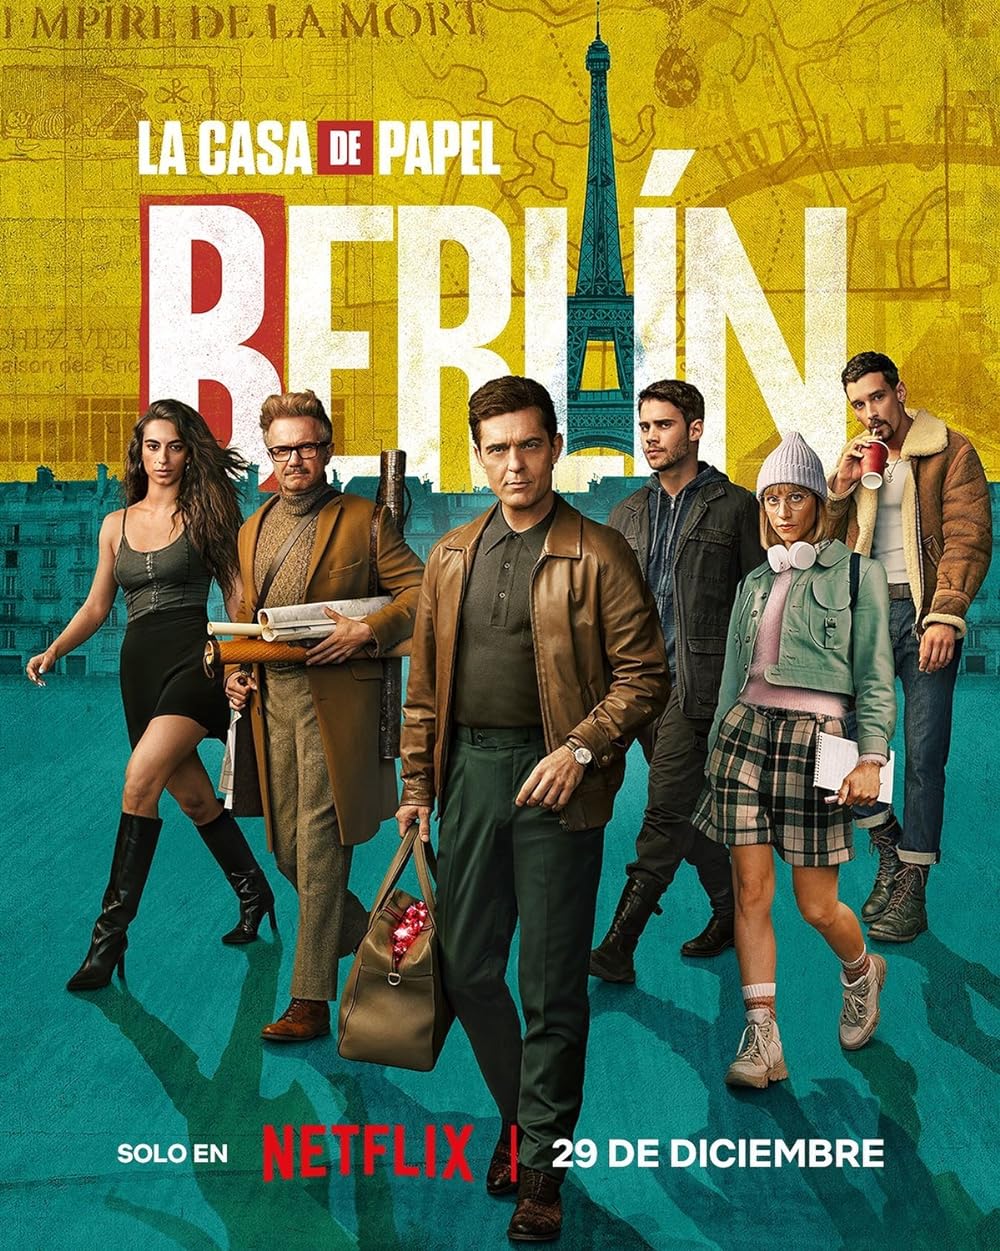 Berlin (December 29) - Streaming on NetflixBerlin focuses on Pedro Alonso's character, offering insights into his leadership in executing heists throughout Europe, including a sophisticated scheme in Paris, intertwining action, suspense, and drama.